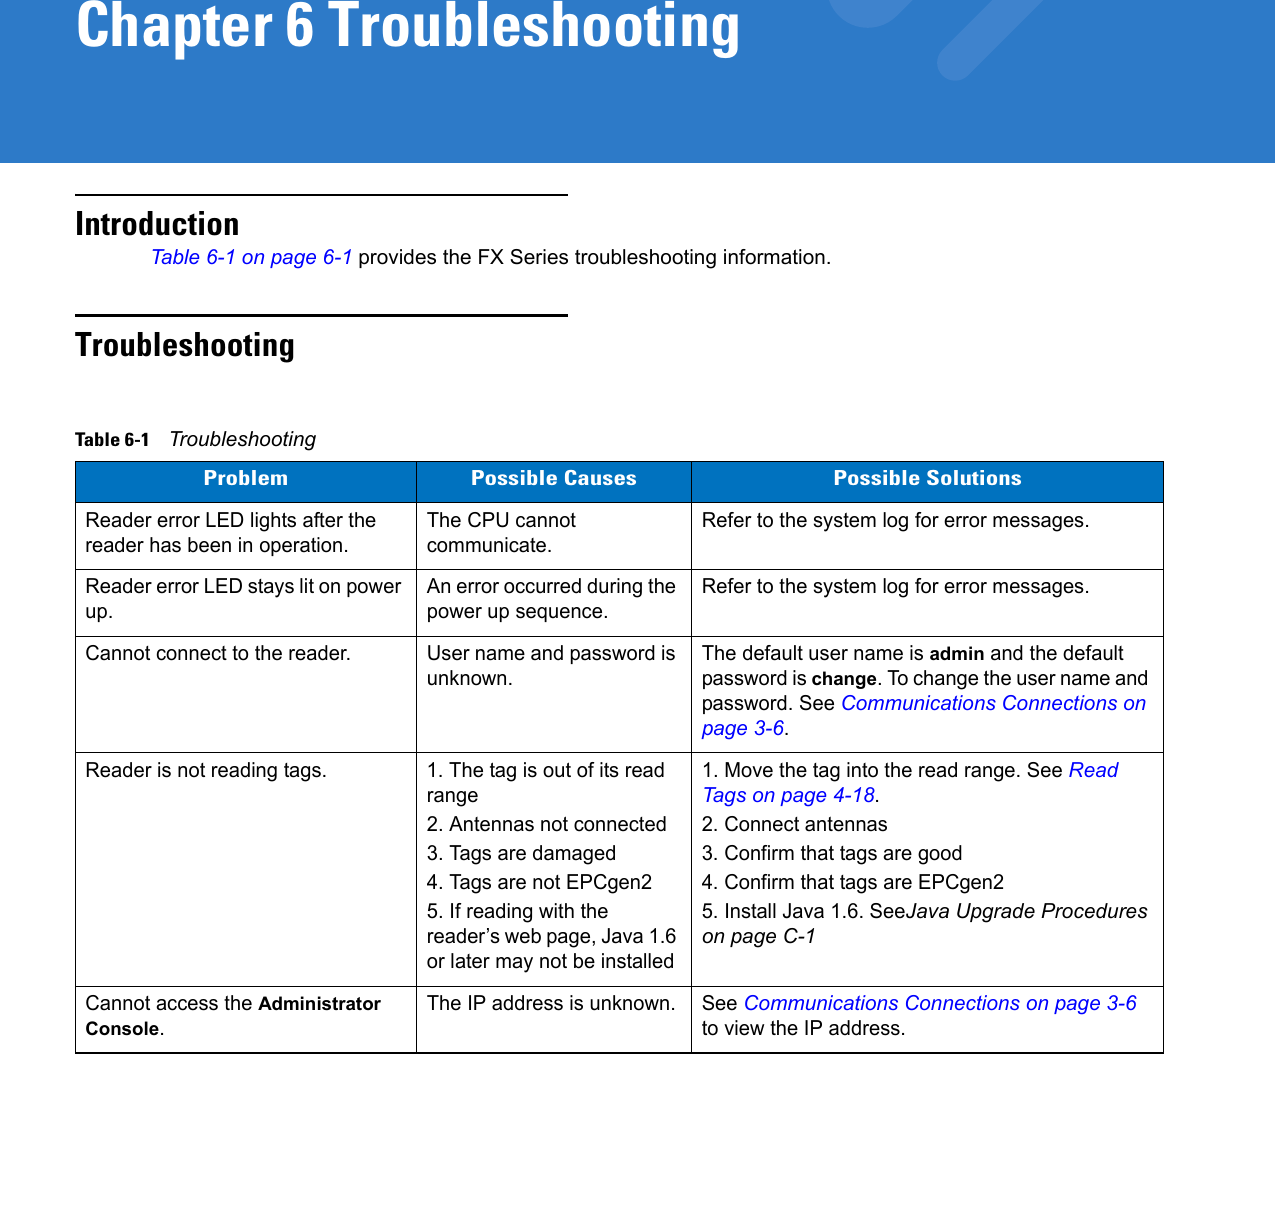 Chapter 6 TroubleshootingIntroductionTable 6-1 on page 6-1 provides the FX Series troubleshooting information.TroubleshootingTable 6-1    TroubleshootingProblem Possible Causes Possible SolutionsReader error LED lights after the reader has been in operation.The CPU cannot communicate.Refer to the system log for error messages.Reader error LED stays lit on power up.An error occurred during the power up sequence.Refer to the system log for error messages.Cannot connect to the reader. User name and password is unknown.The default user name is admin and the default password is change. To change the user name and password. See Communications Connections on page 3-6.Reader is not reading tags. 1. The tag is out of its read range 2. Antennas not connected3. Tags are damaged 4. Tags are not EPCgen25. If reading with the reader’s web page, Java 1.6 or later may not be installed1. Move the tag into the read range. See Read Tags on page 4-18.2. Connect antennas3. Confirm that tags are good4. Confirm that tags are EPCgen25. Install Java 1.6. SeeJava Upgrade Procedures on page C-1Cannot access the Administrator Console.The IP address is unknown. See Communications Connections on page 3-6 to view the IP address.